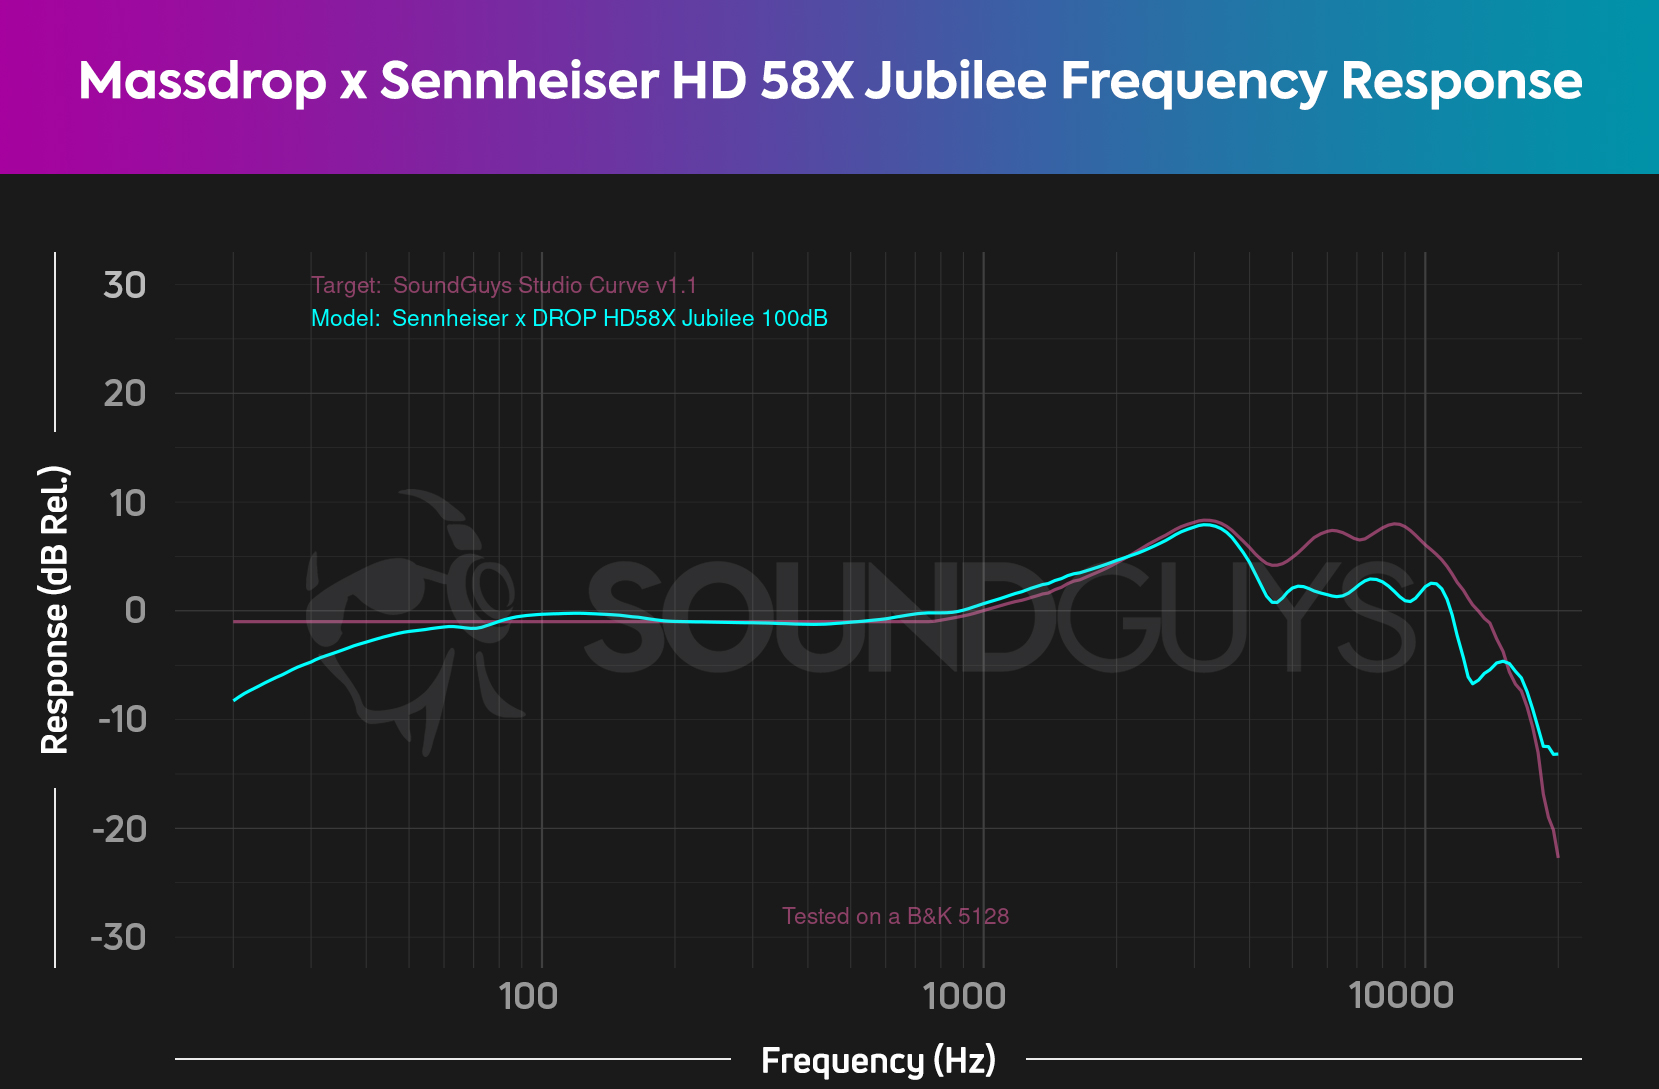 A chart depicts the Massdrop x Sennheiser HD 58X Jubilee frequency response compared to the SoundGuys Studio Curve V2.